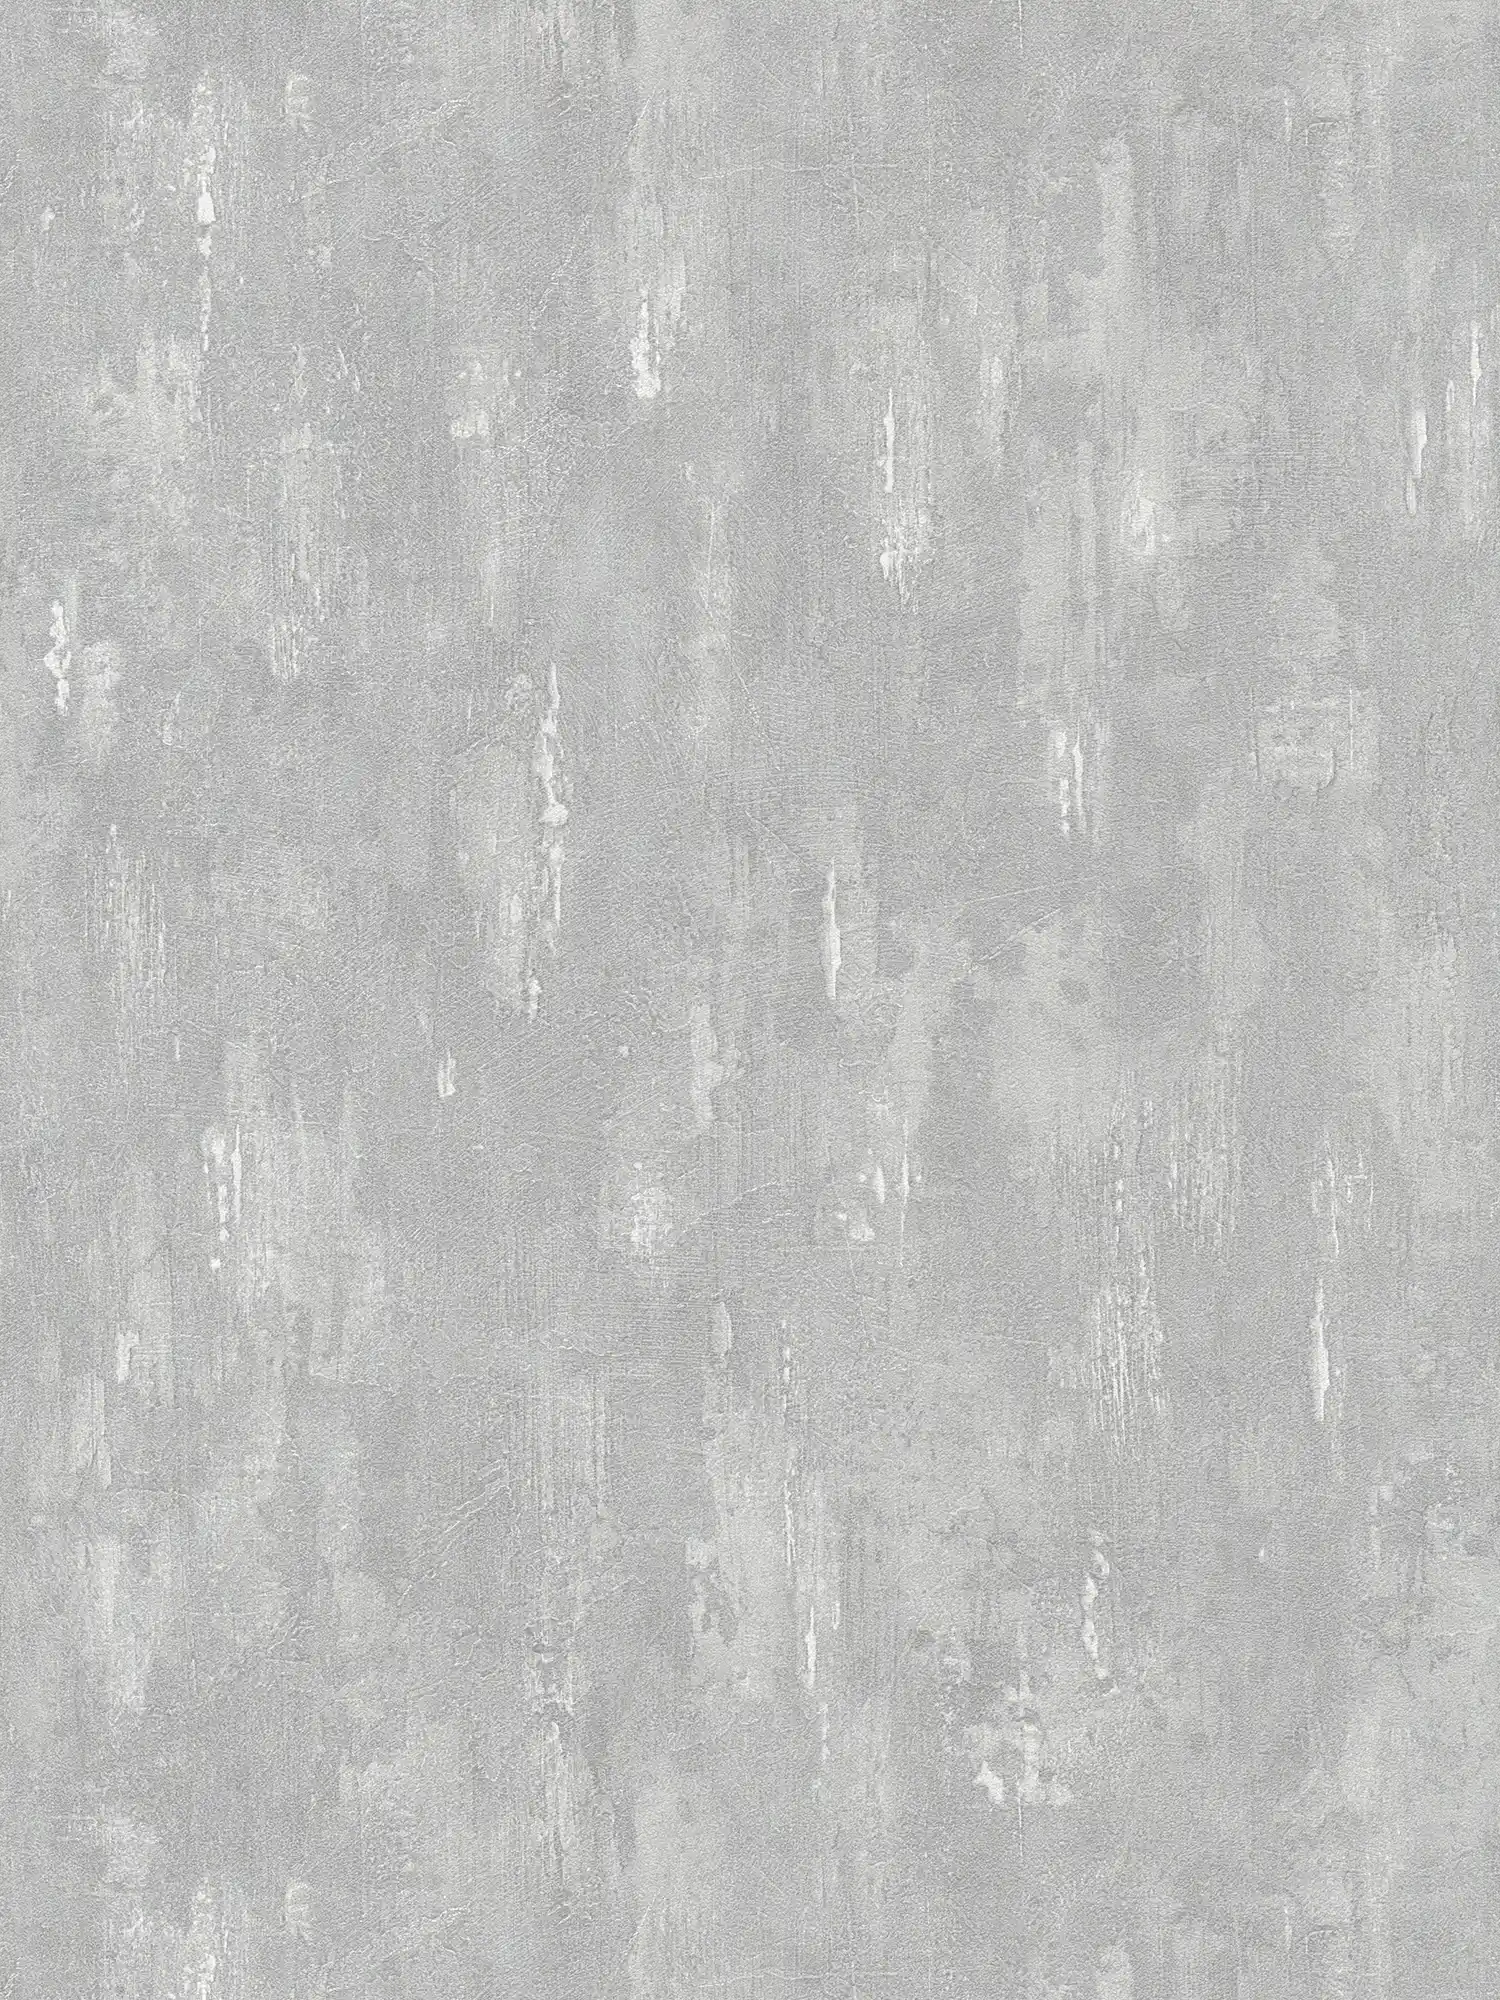 Wallpaper with plaster texture, concrete look and gradient - grey
